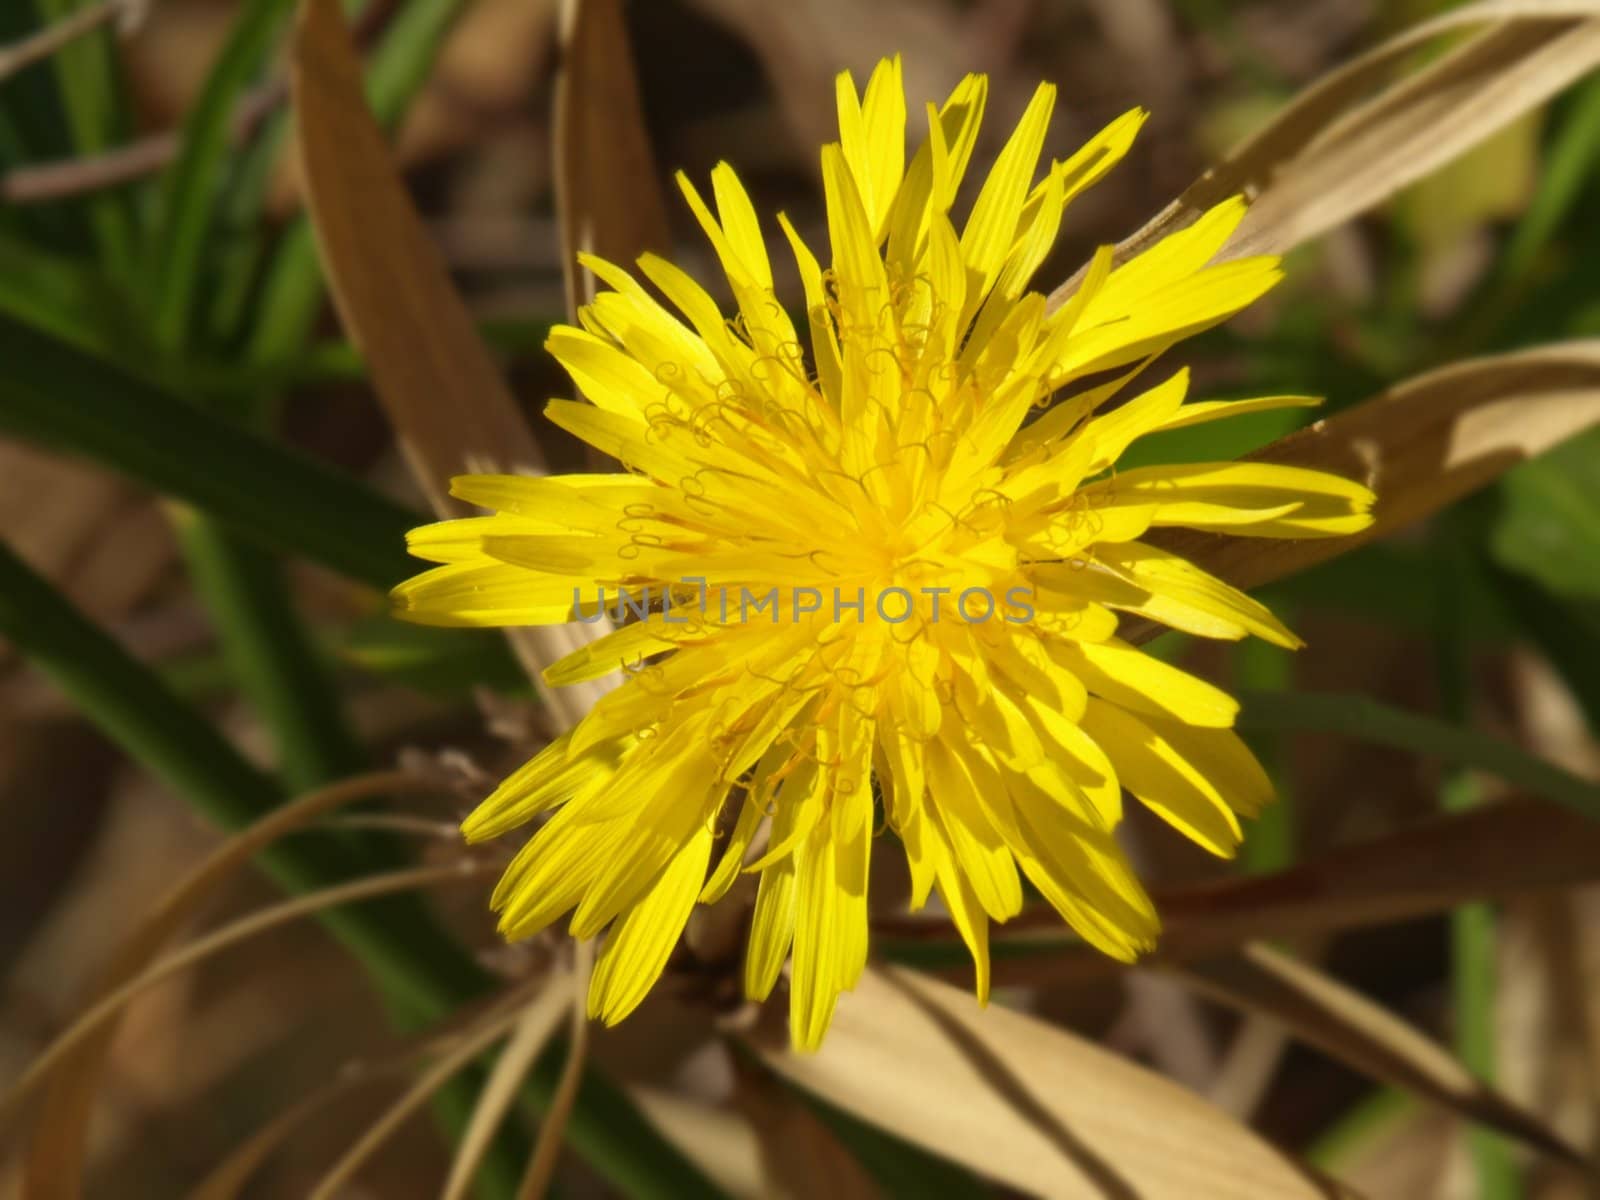 a close up image of a yellow flower